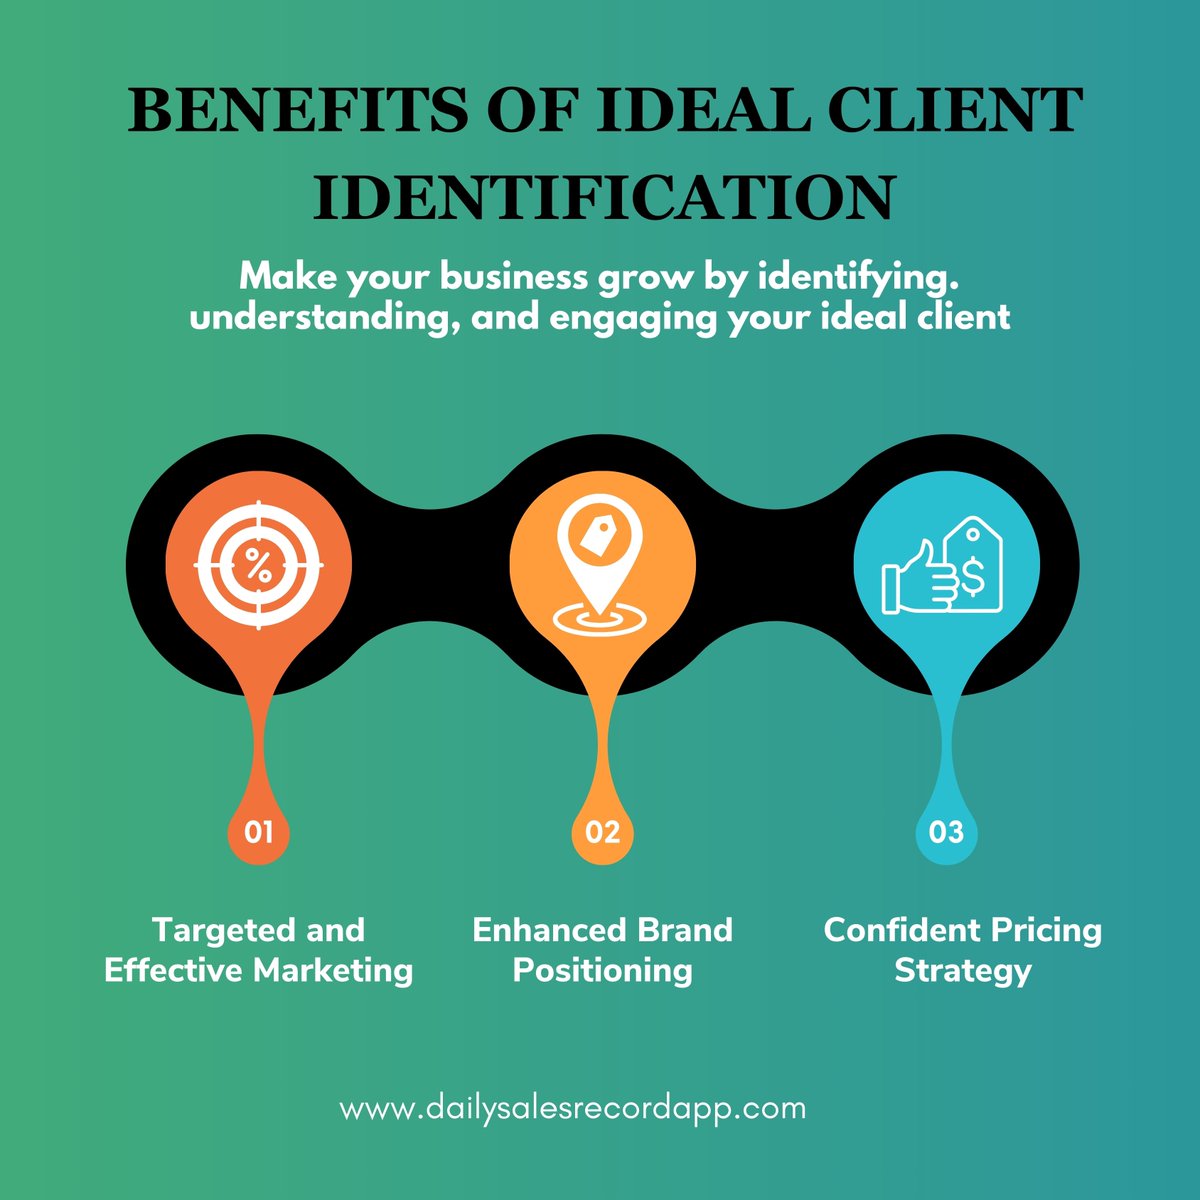 Are you struggling to attract new clients and achieve your business goals?

The key to unlocking sustainable growth lies in identifying your ideal client.

#idealclient
#businessgrowth
#clientacquisition
#marketingstrategy
#tailoredmessaging
#revenueboost
#businessgoals